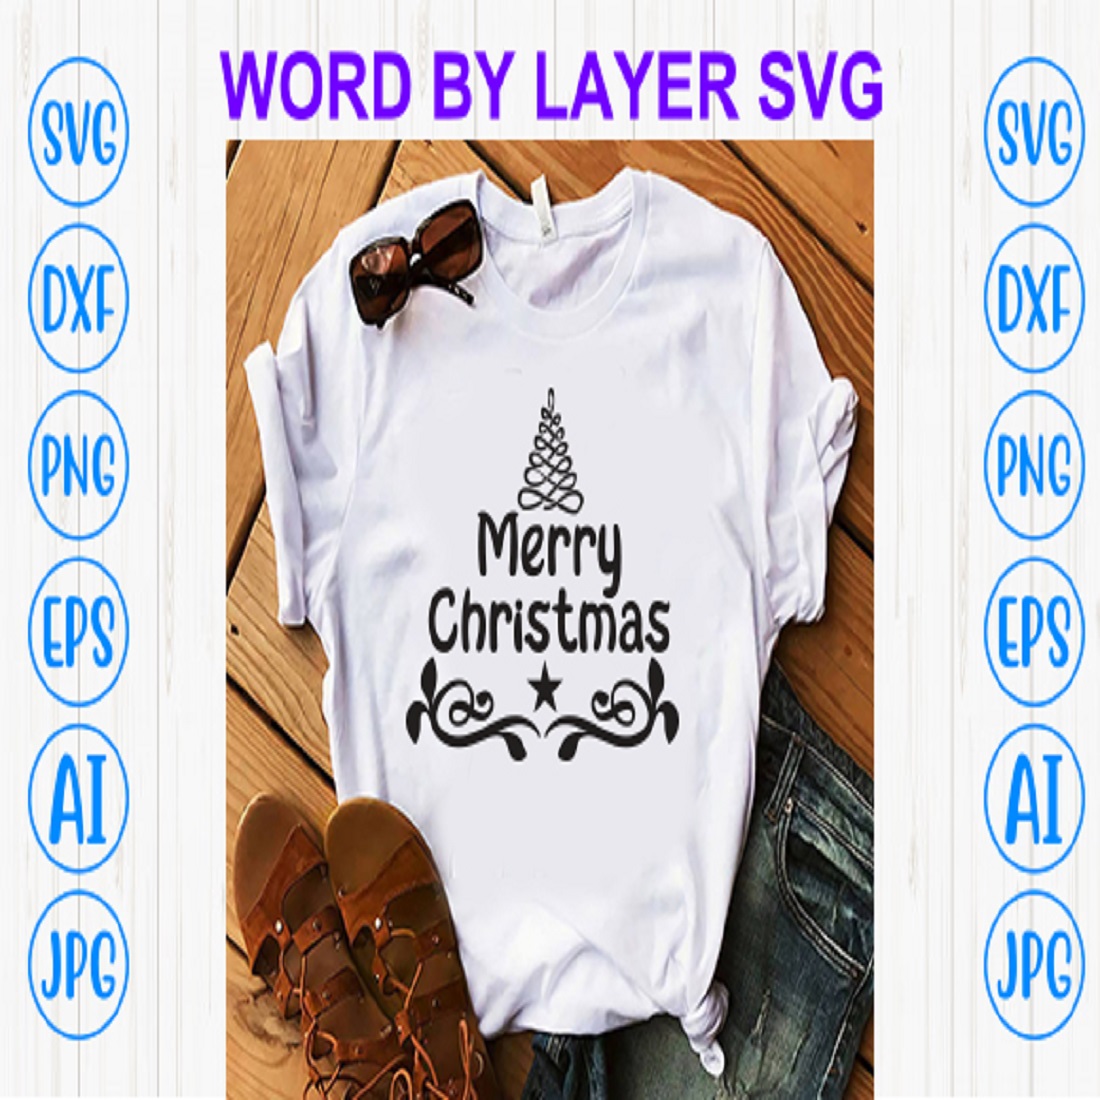 Merry Christmas svg preview image.